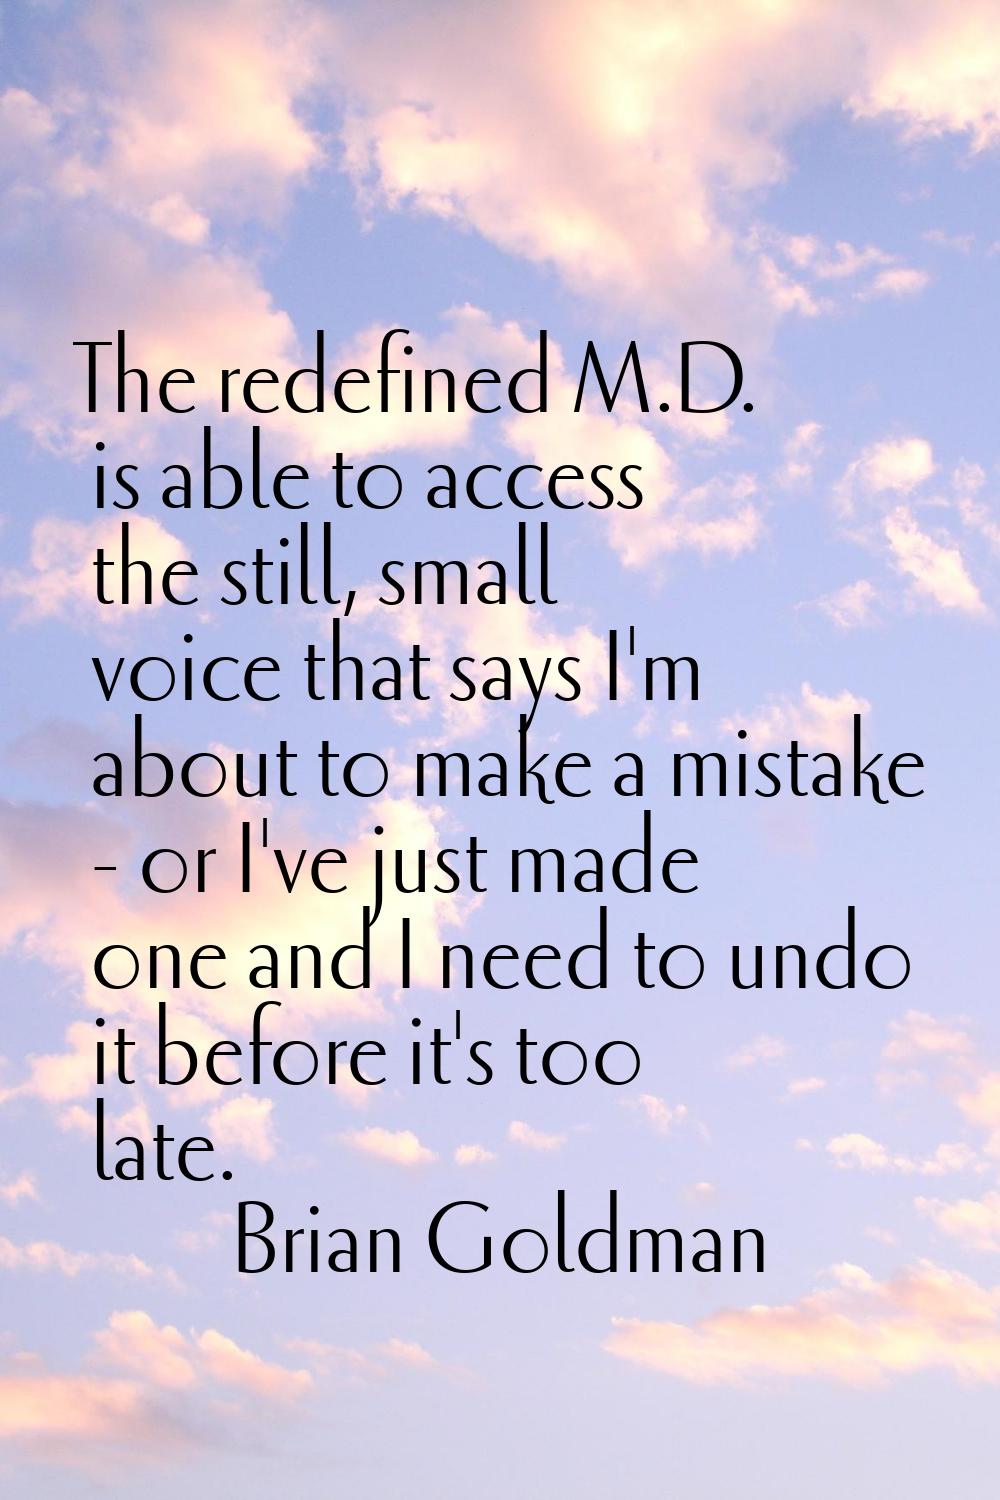 The redefined M.D. is able to access the still, small voice that says I'm about to make a mistake -